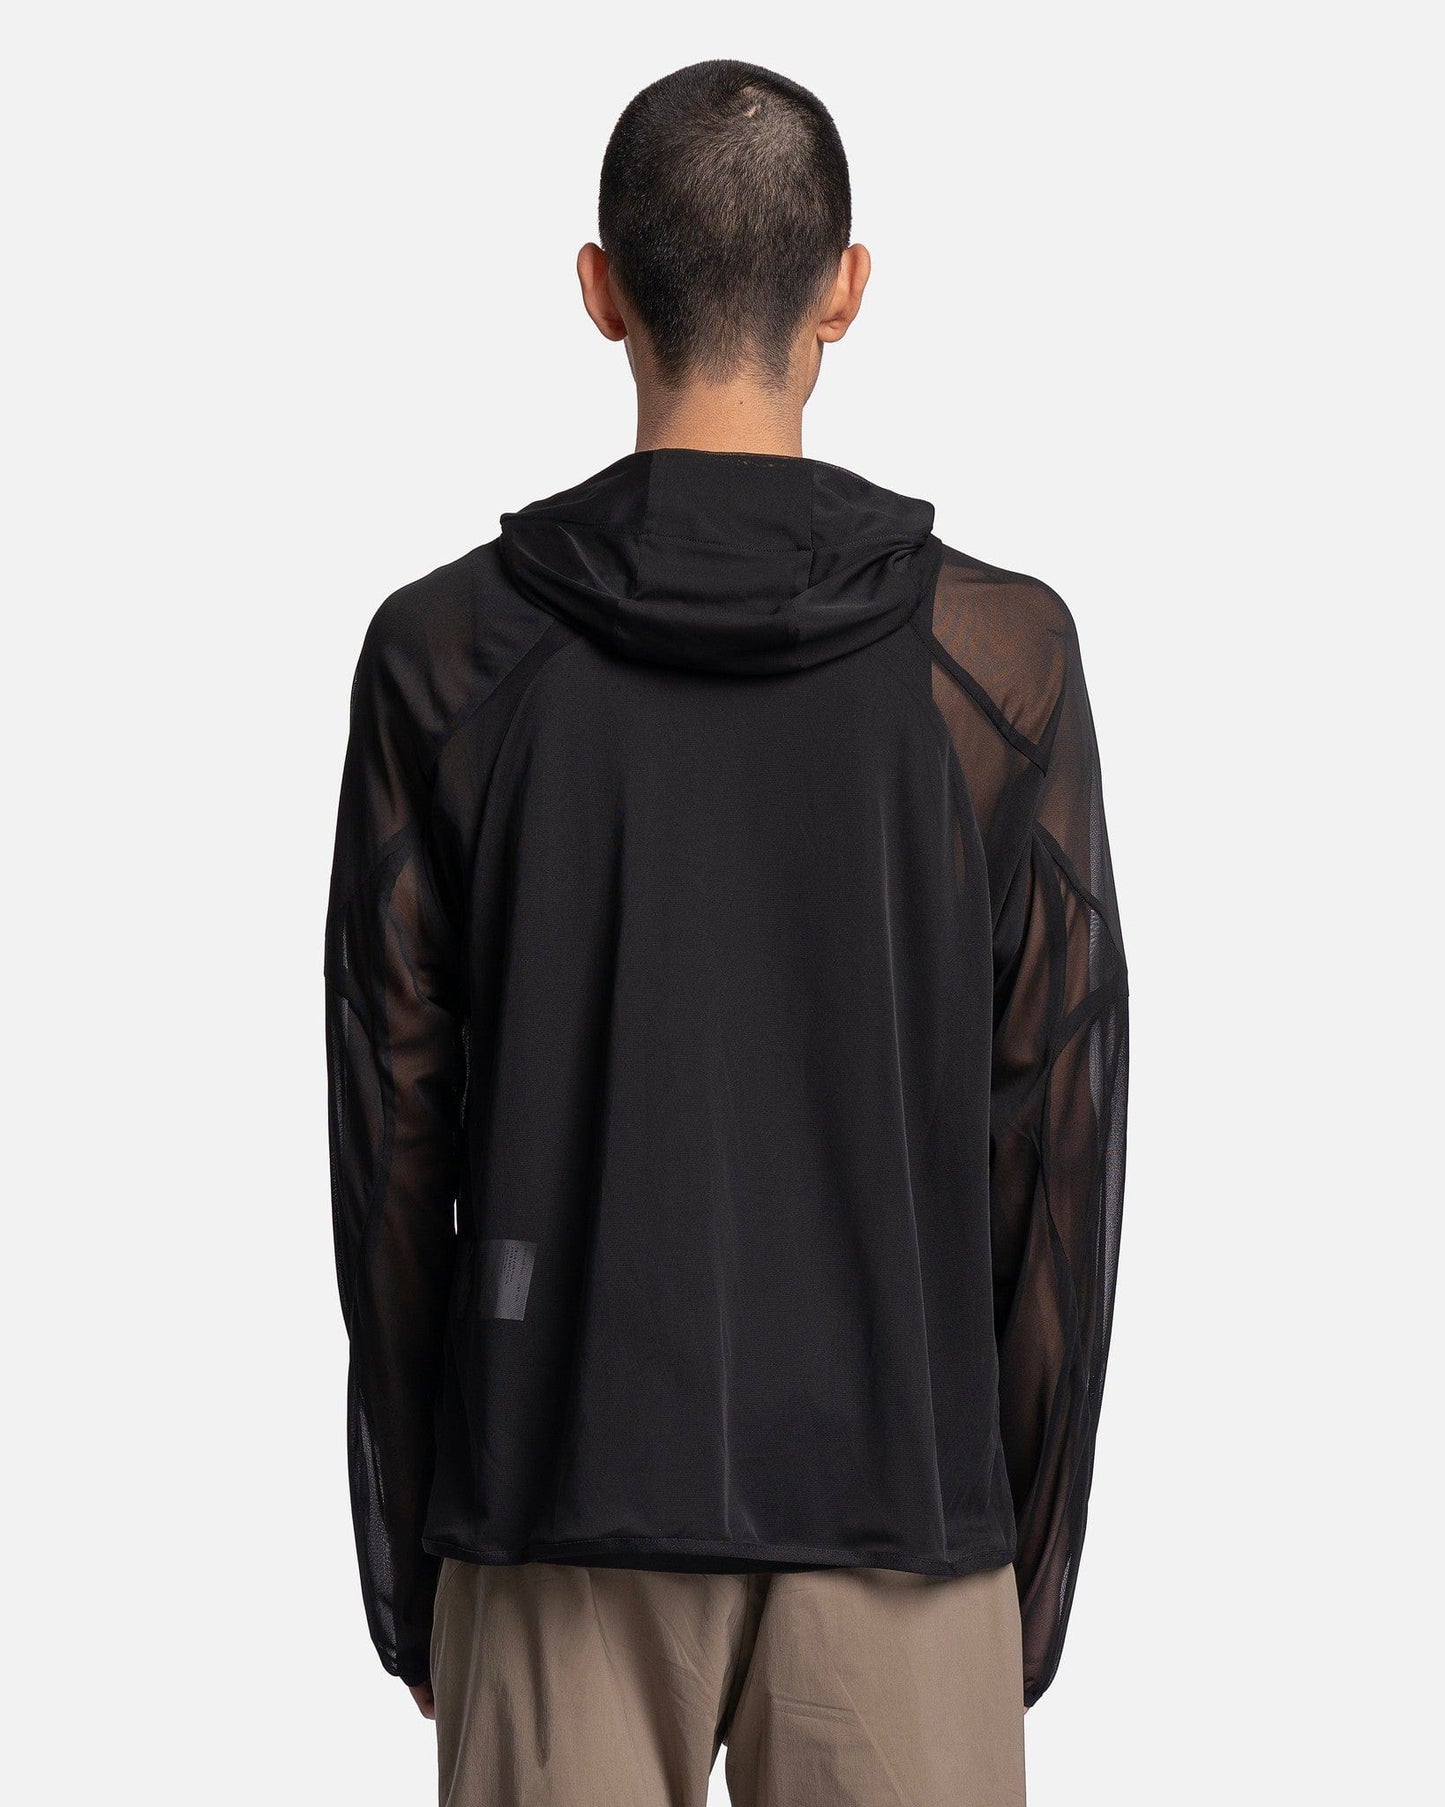 POST ARCHIVE FACTION (P.A.F) Men's Sweatshirts 5.0+ Hoodie Center in Black